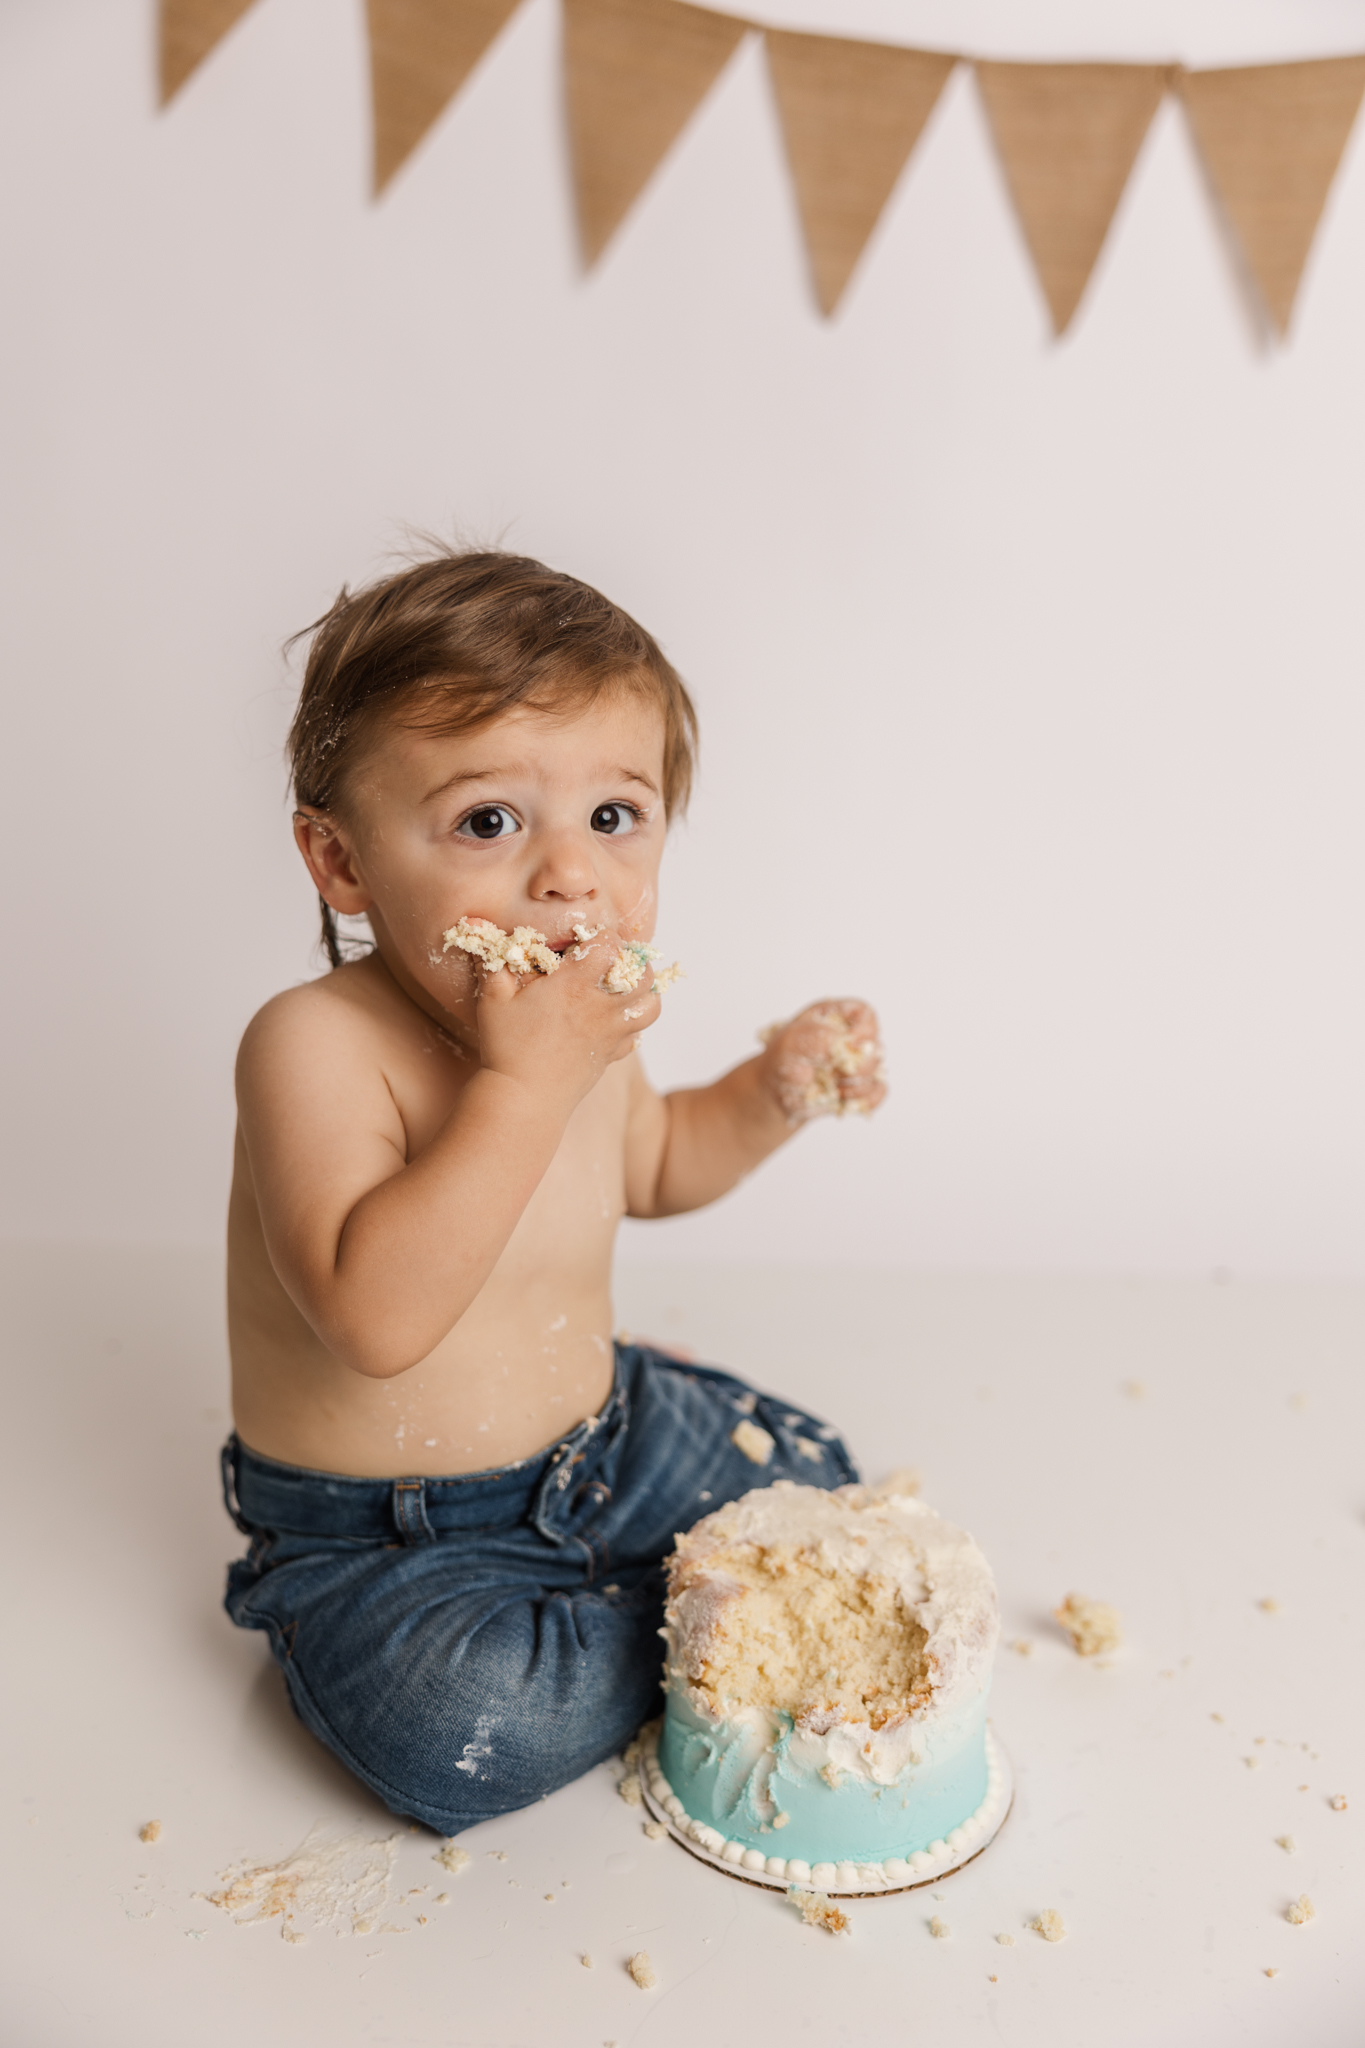 One year old eating birthday cake